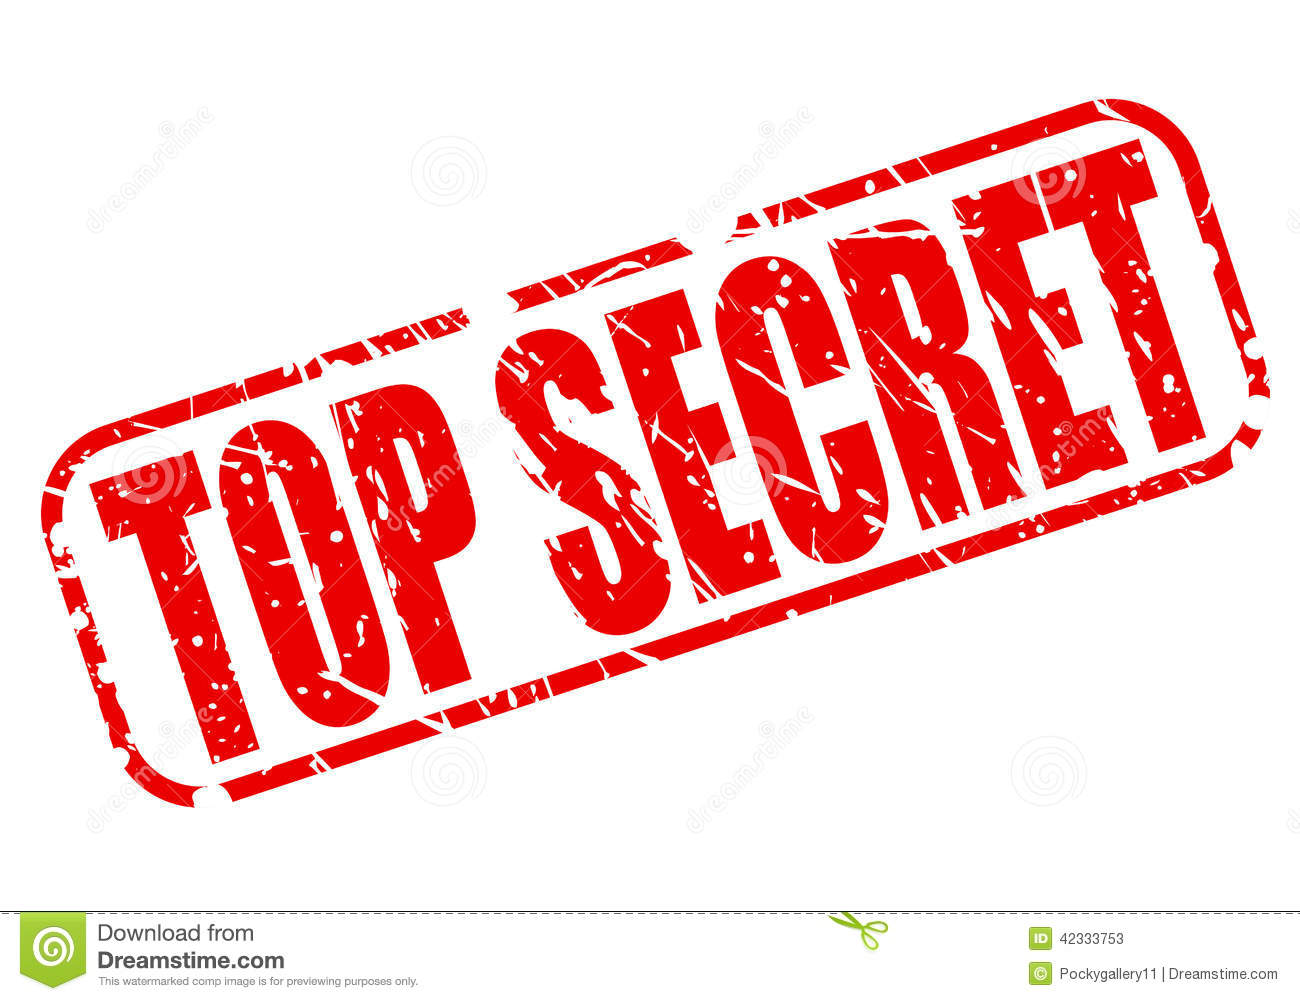 Related Pictures Top Secret C